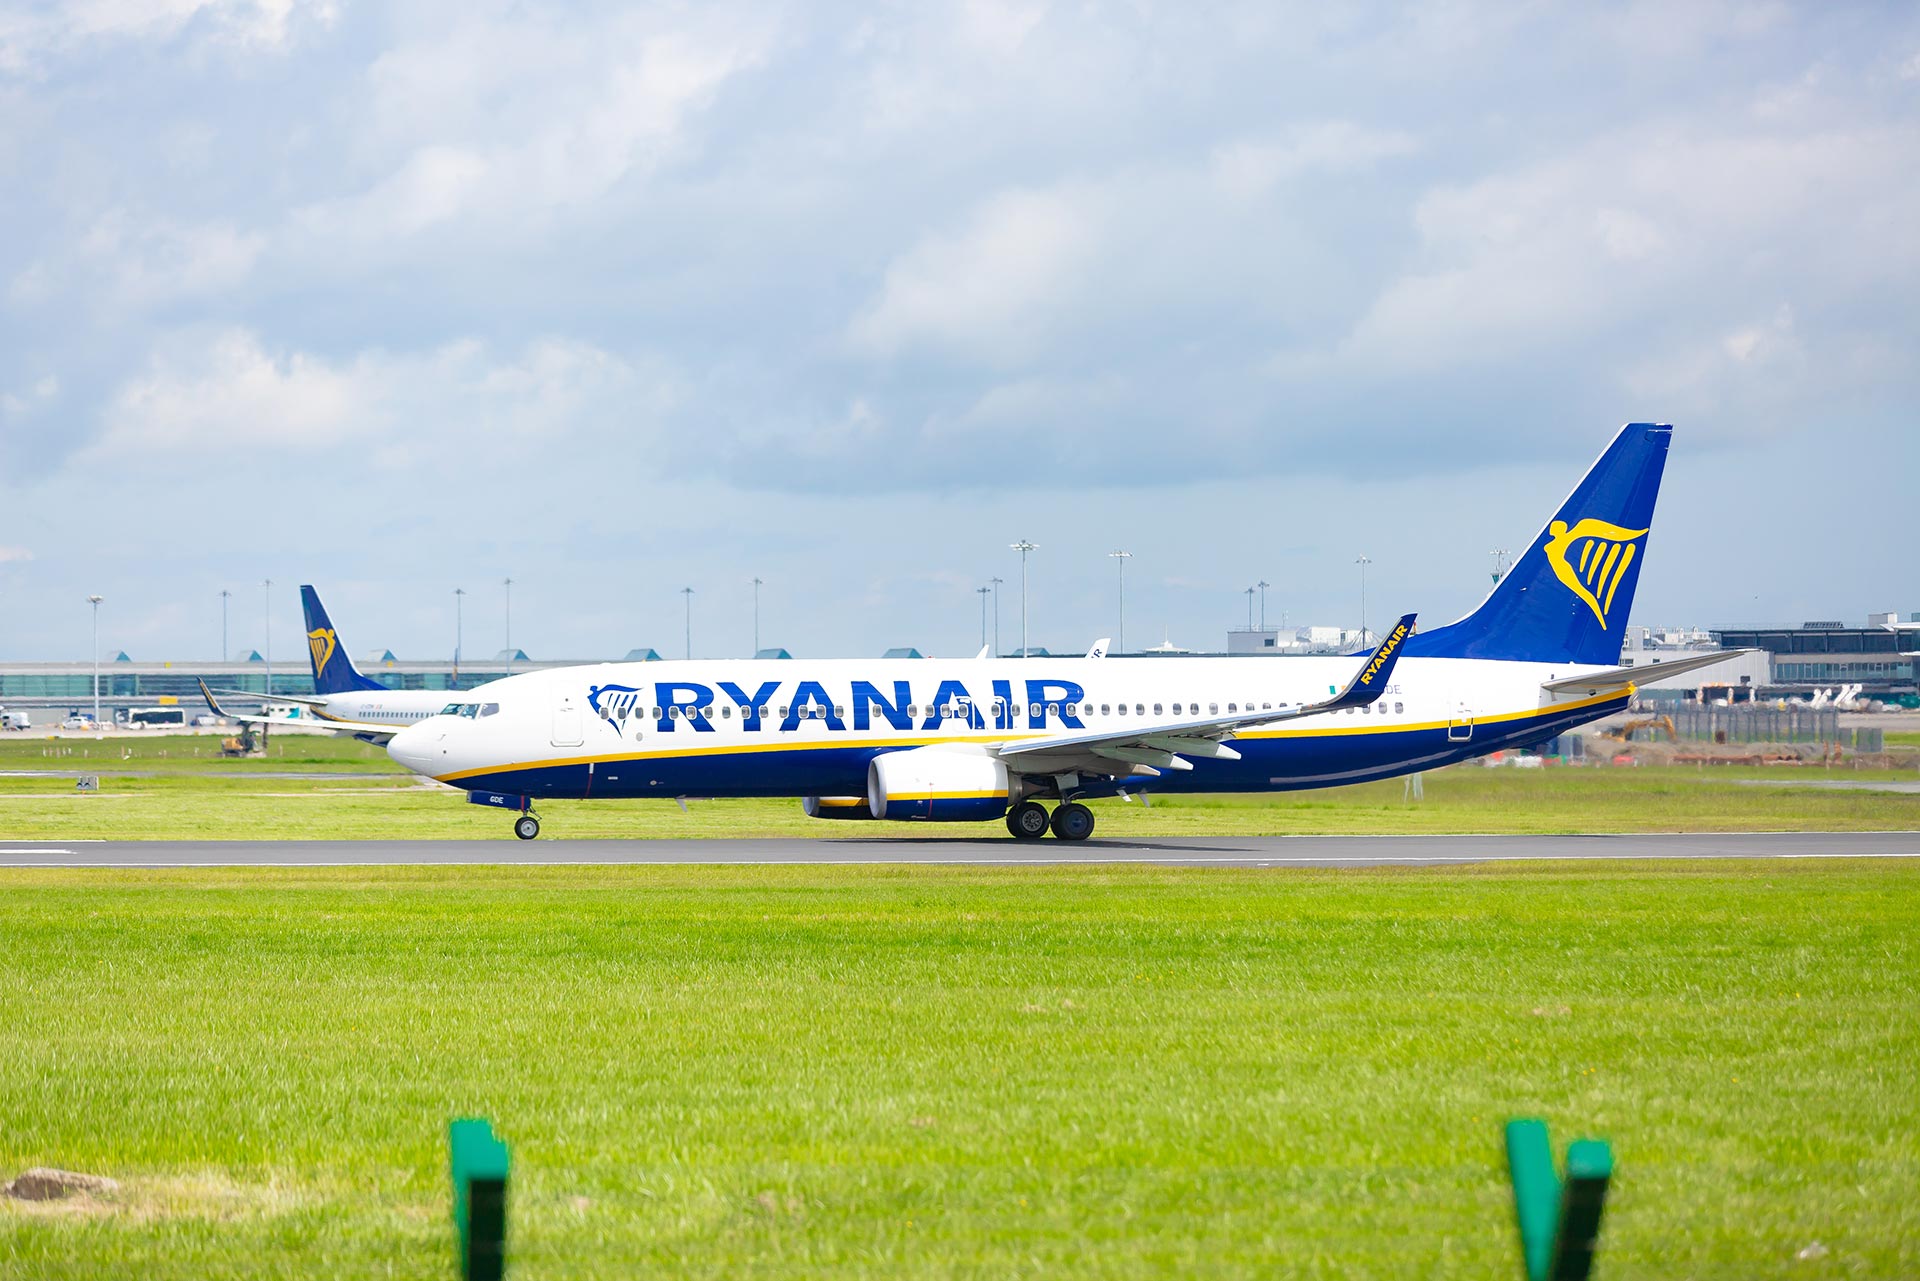 Ryanair’s C02 Emissions For August At Just 67g Per Passenger/Km